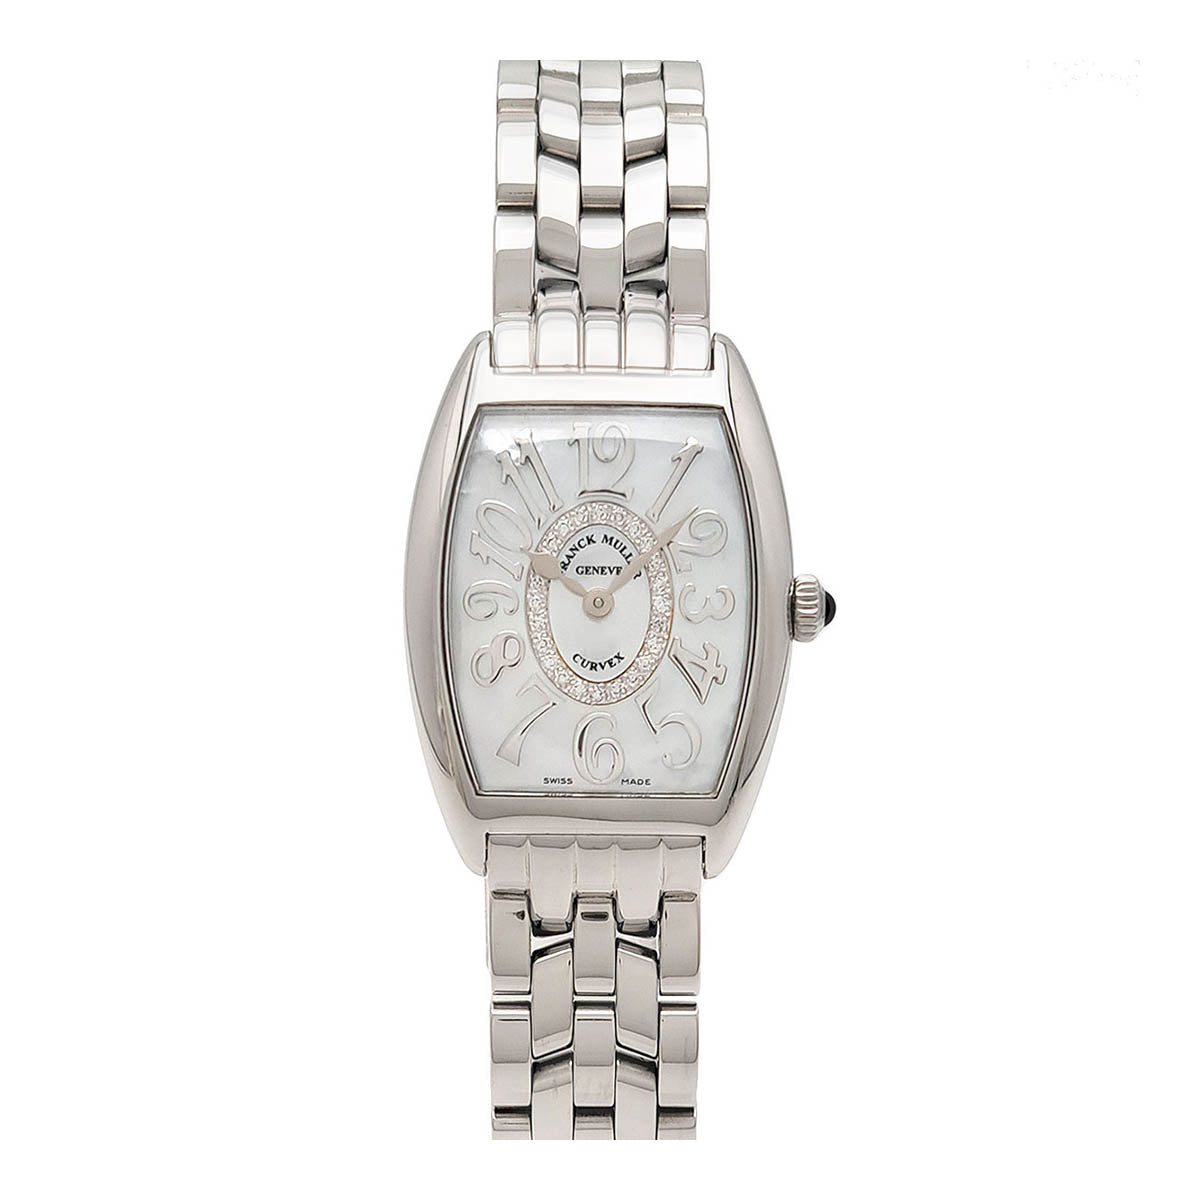 FRANCK MULLER Tono Curvex Mother of Pearl Relief 1752QZ REL MOP CD1R OAC Quartz Stainless Steel Ladies Watch [Used] 1752QZ REL MOP CD1R OAC